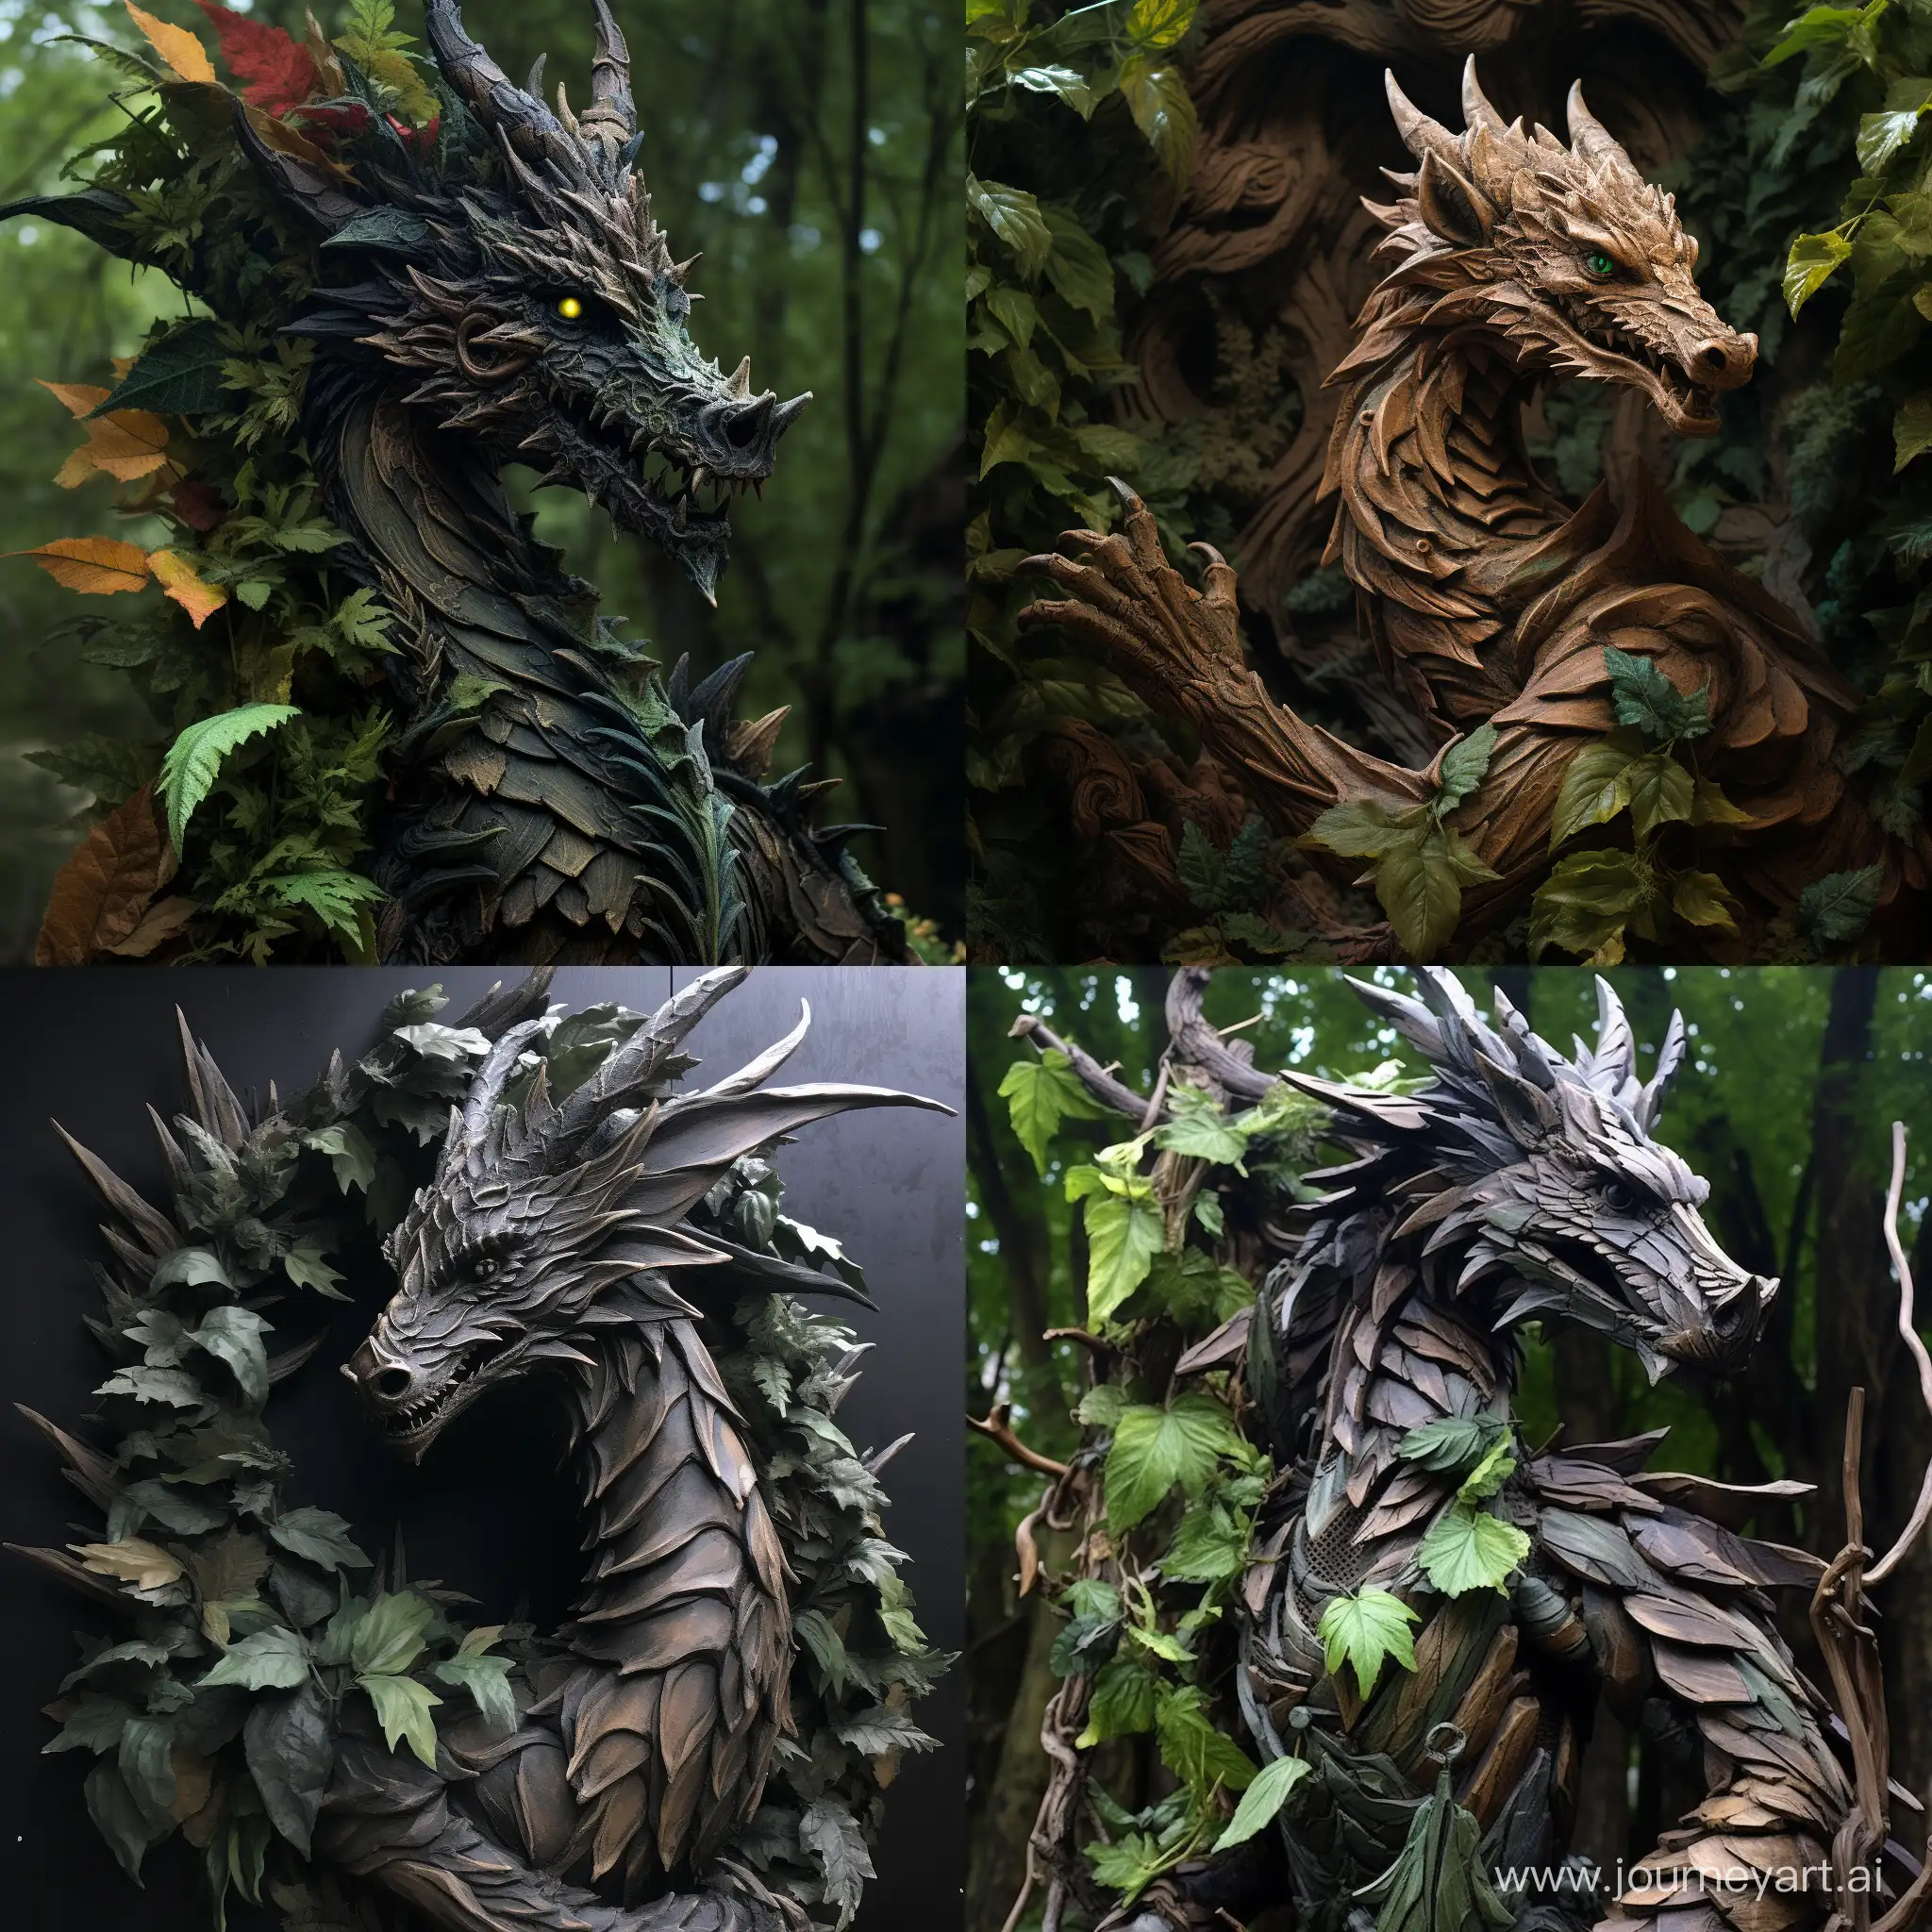 Enchanting-Gothic-Dragon-Sculpture-Crafted-from-Oak-Leaves